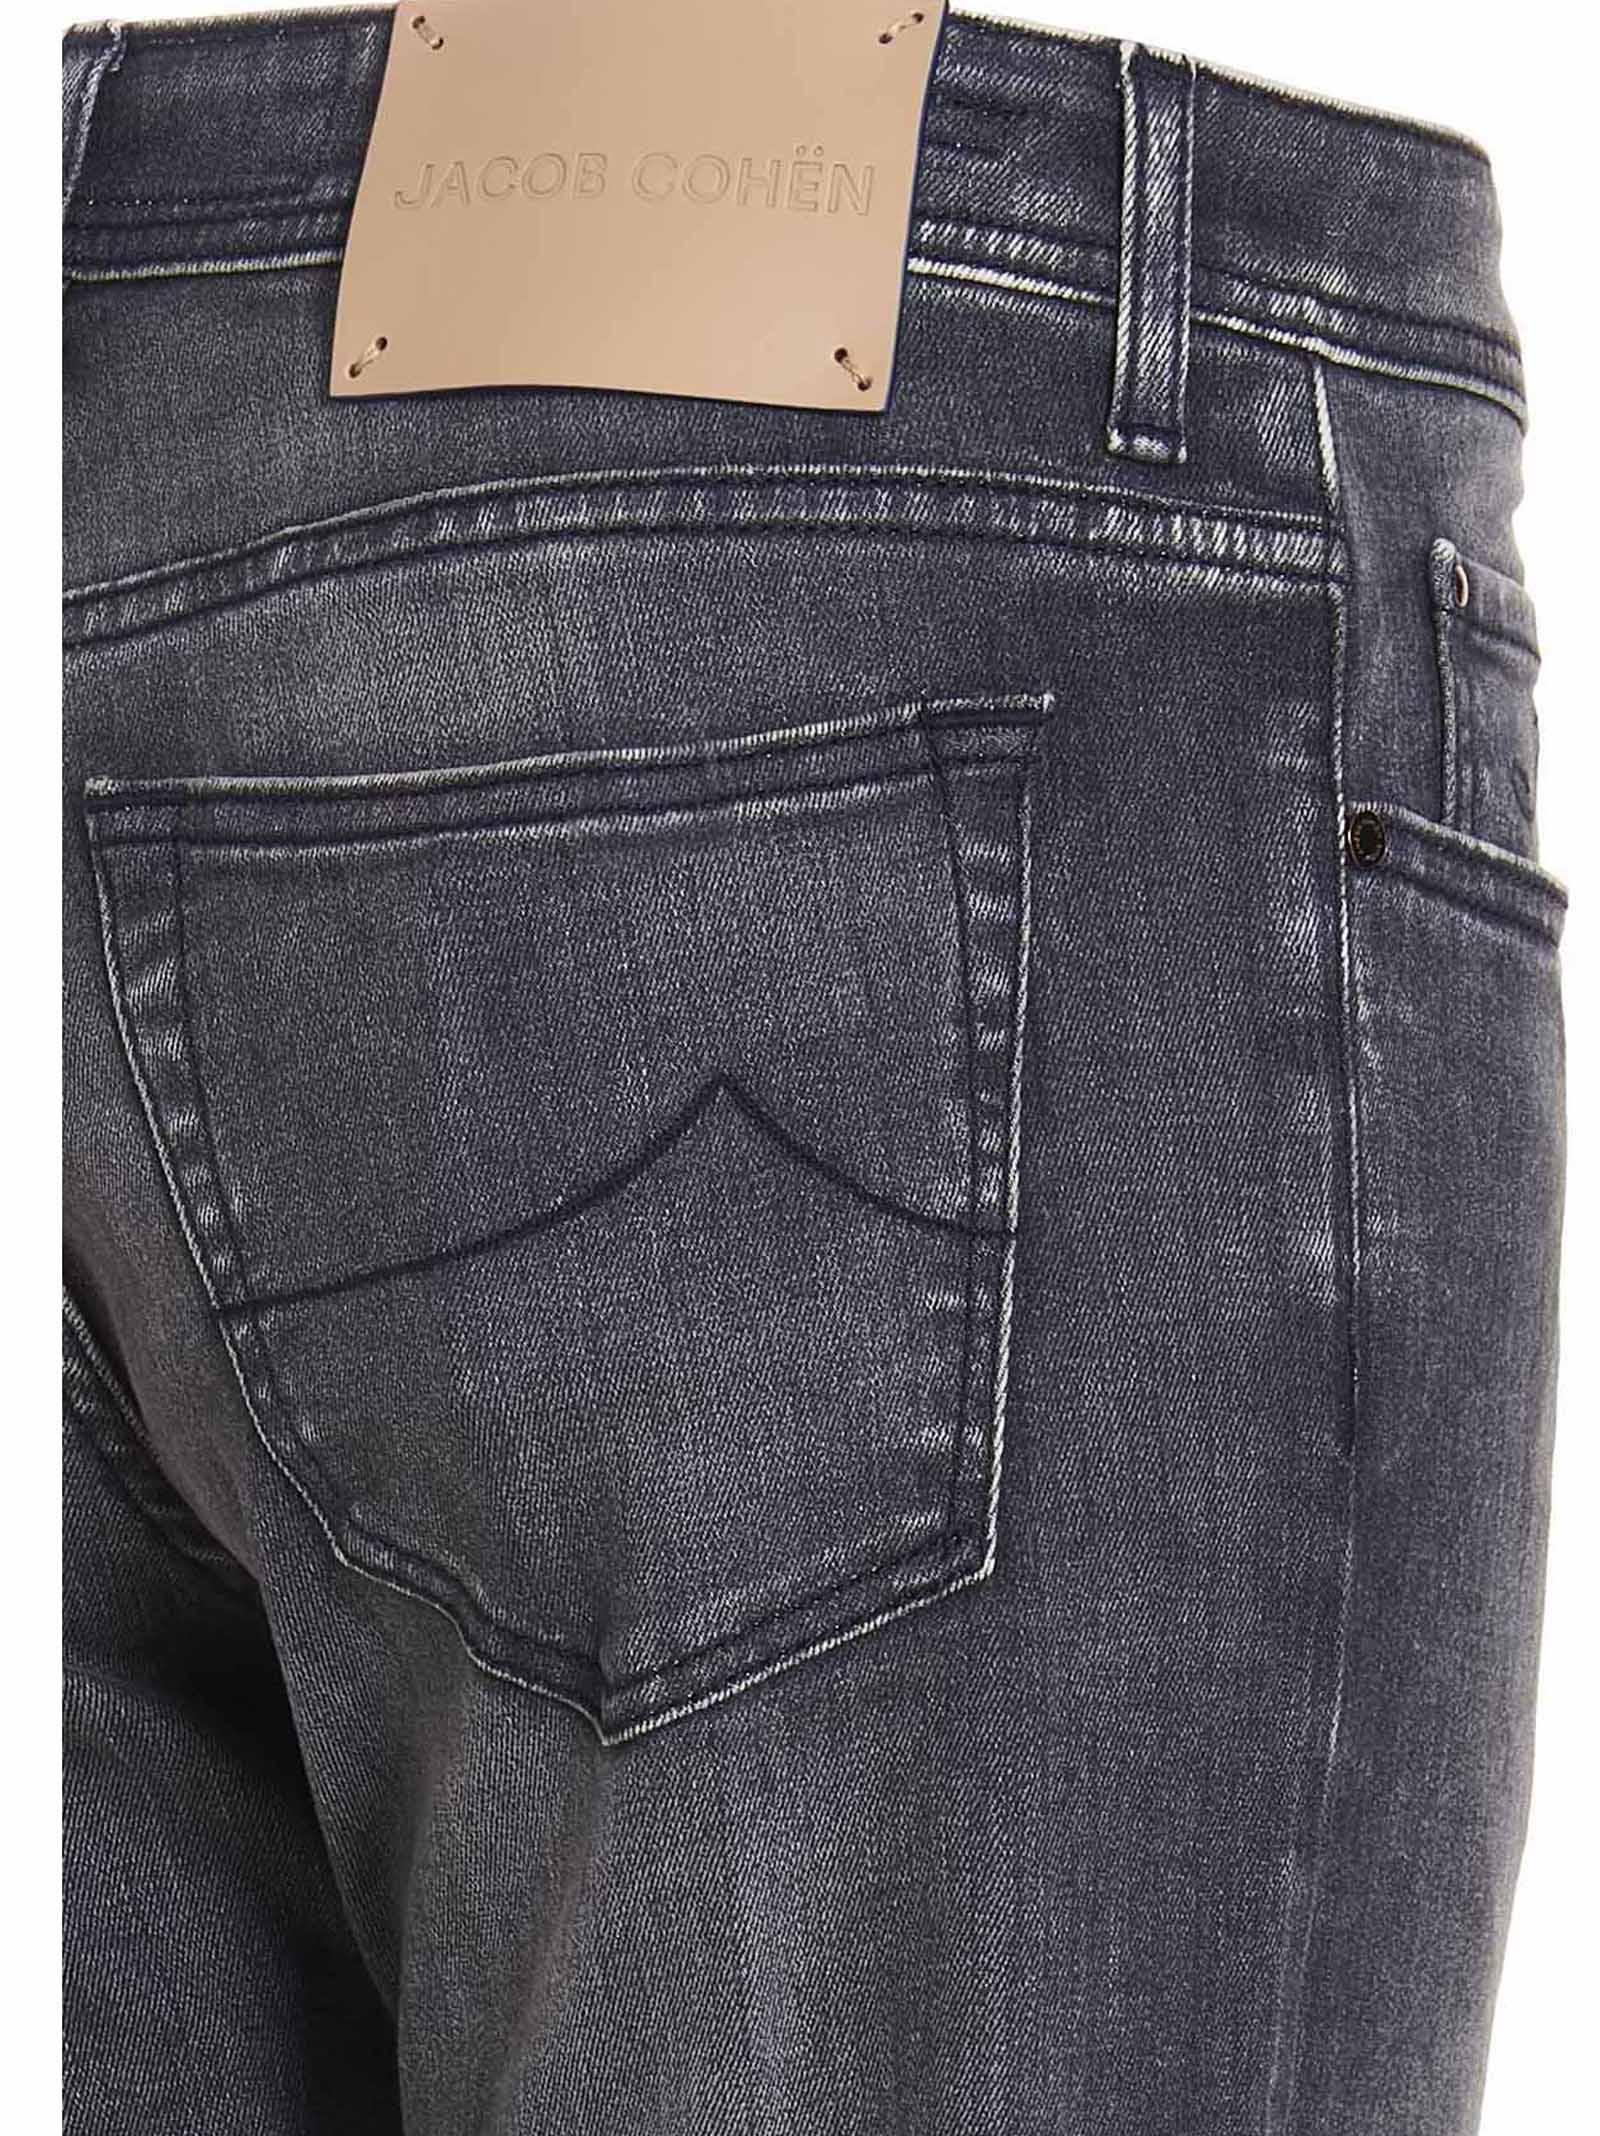 Jacob Cohen Denim Bard Jeans in Gray for Men - Save 13% | Lyst